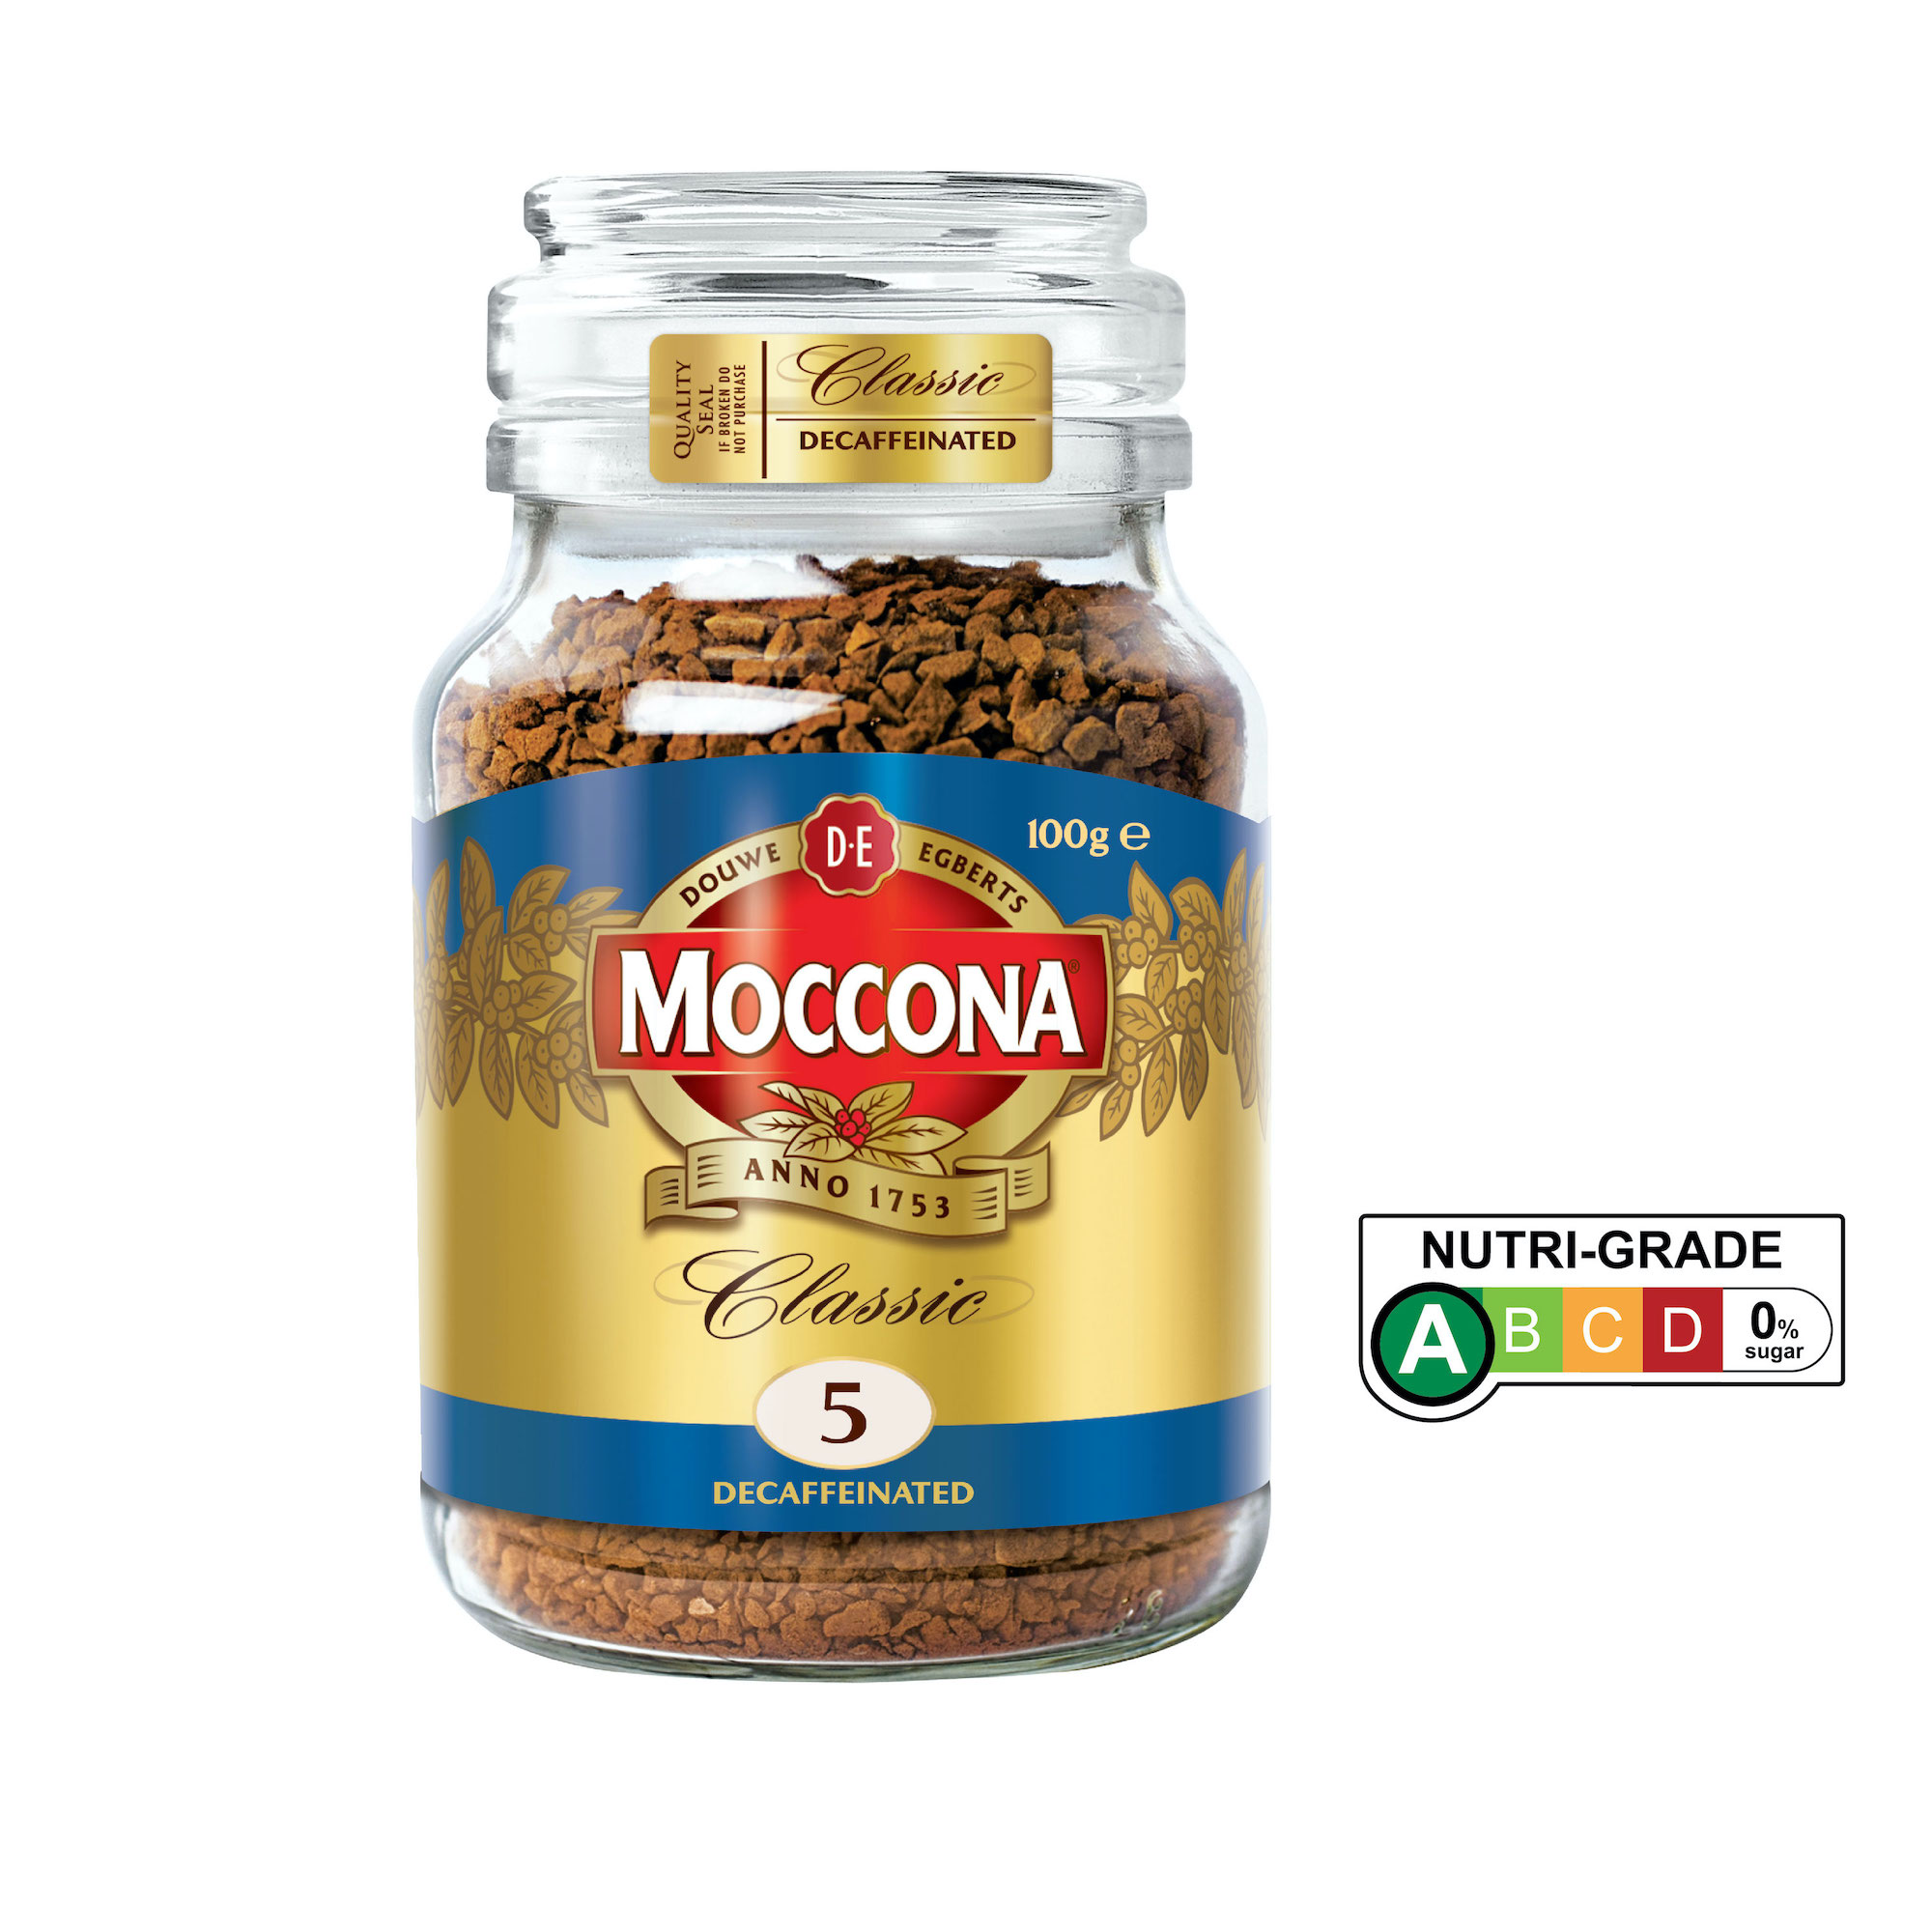 MOCCONA Classic Decaffeinated Intensity 5 Freeze Dried Instant Coffee, 100g